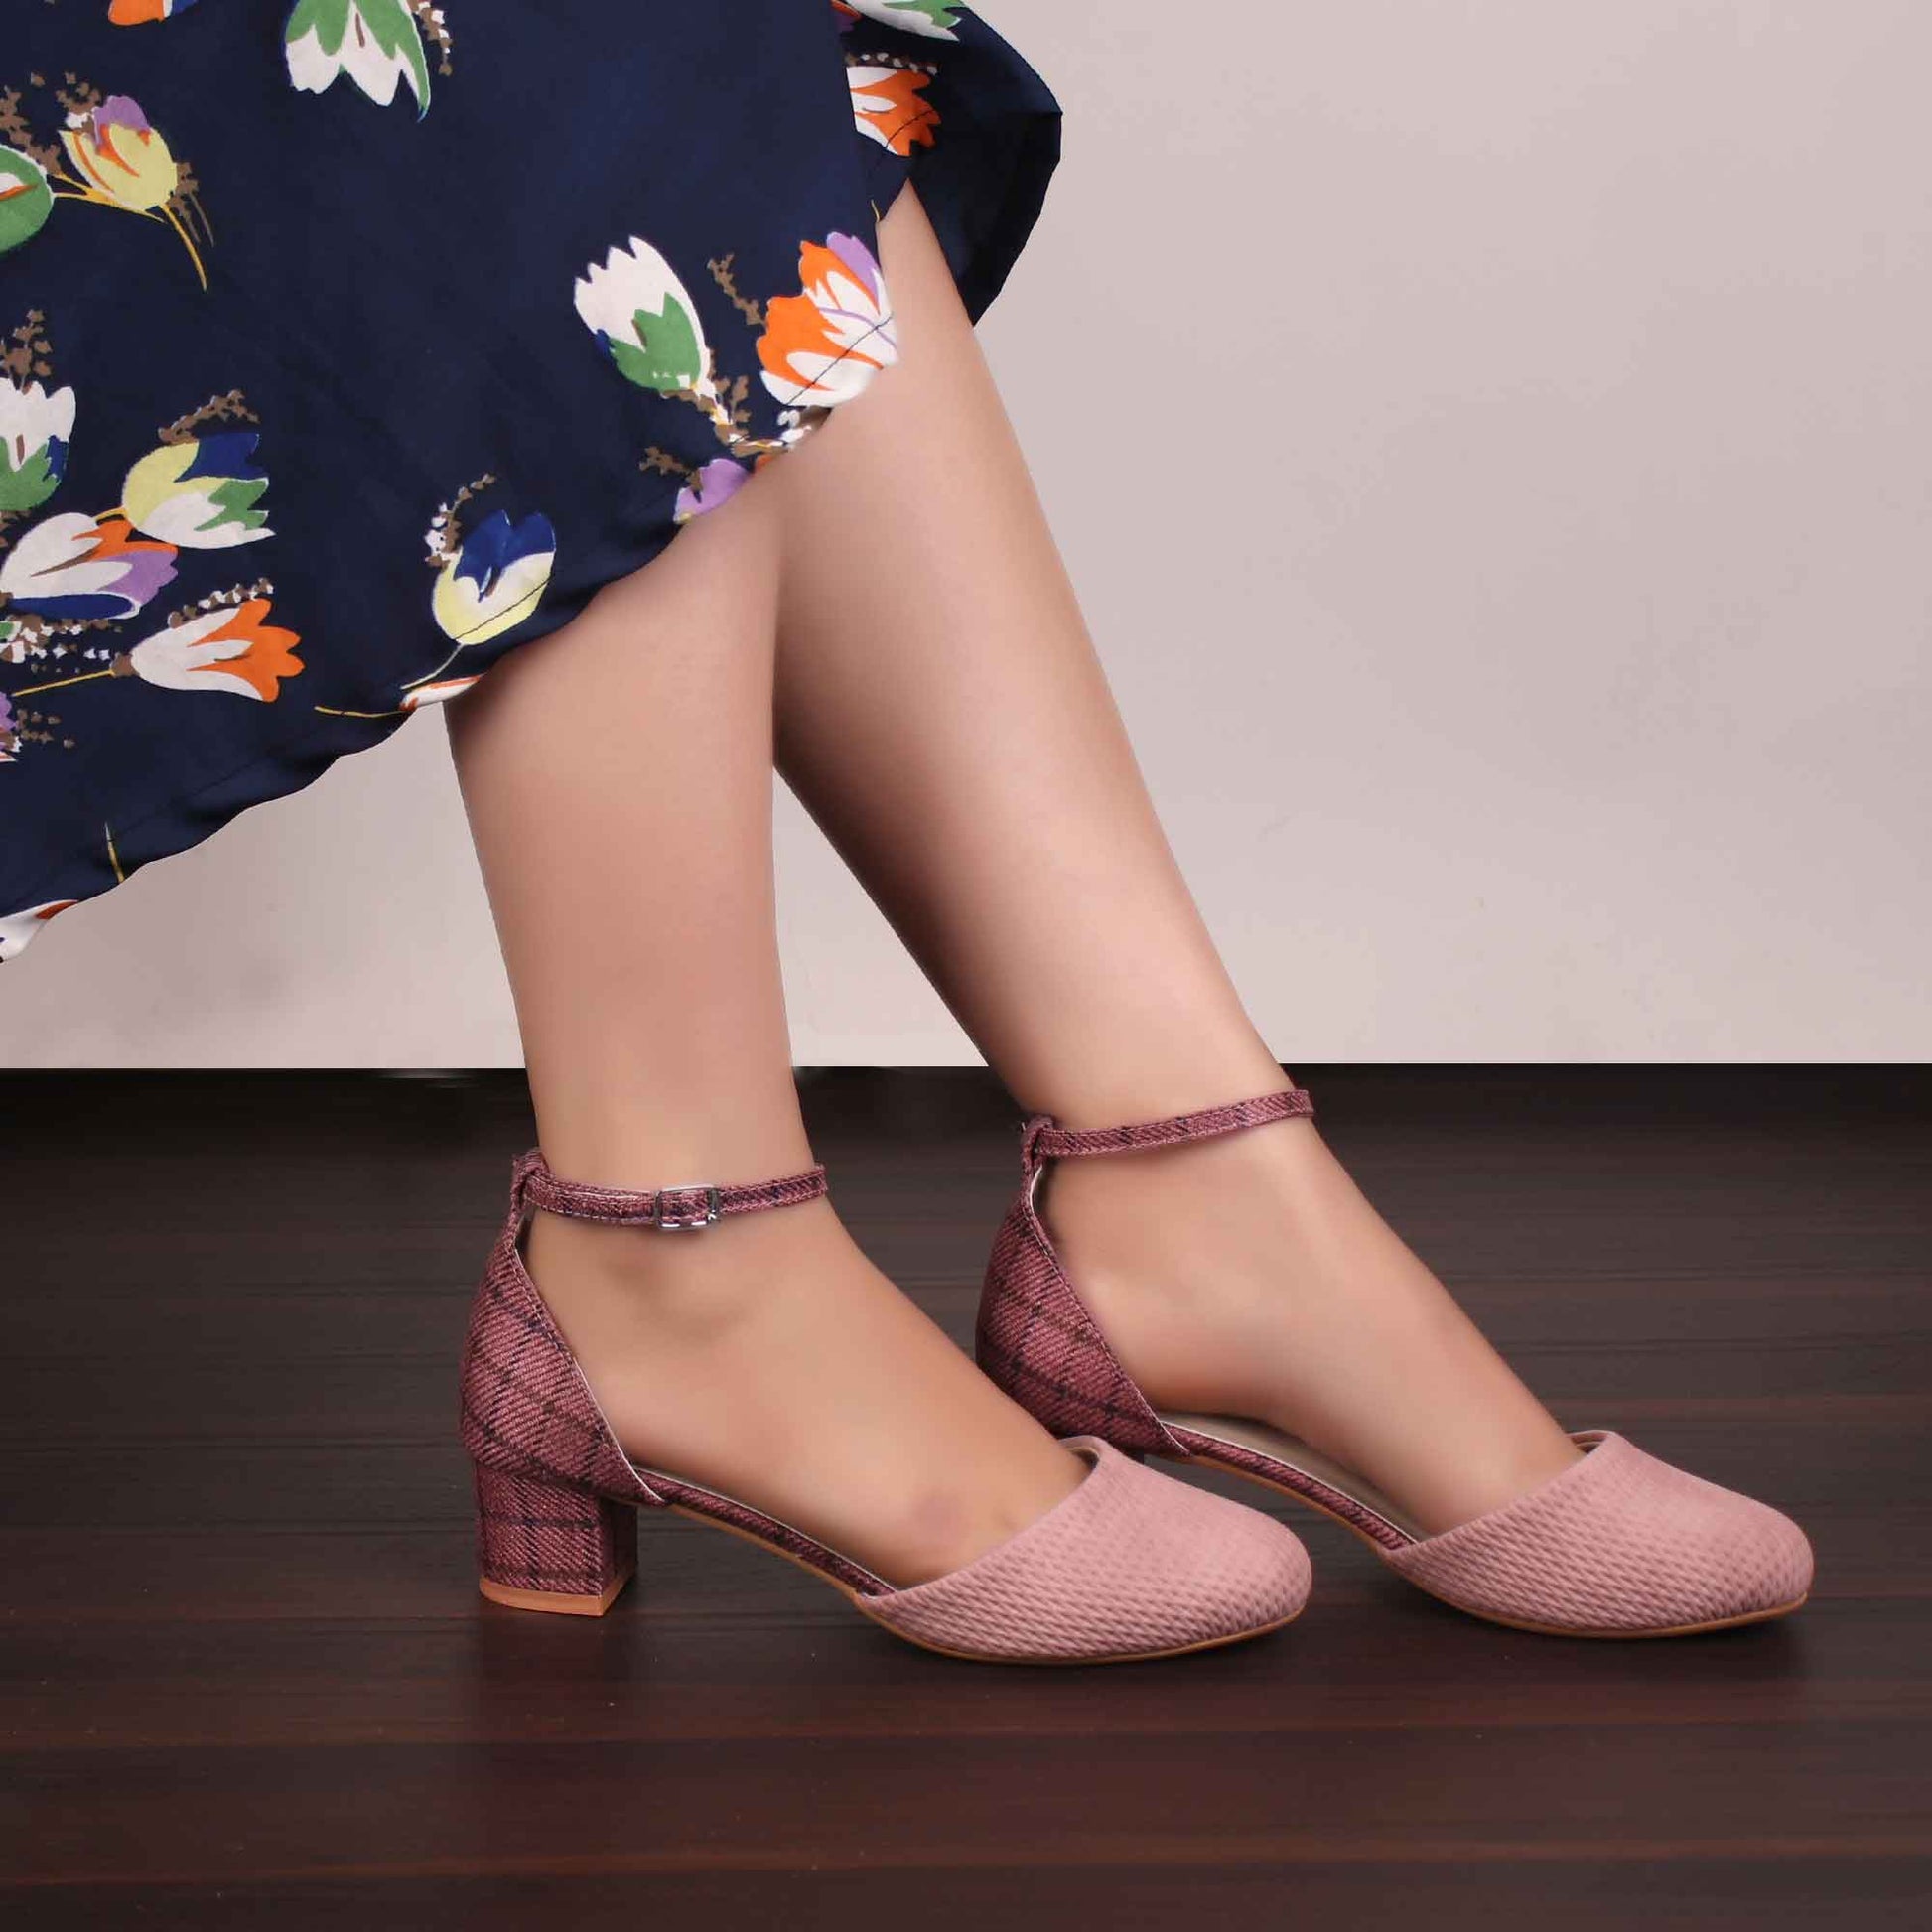 Foot Wear,The Interweave Checked Pink Block Heels - Cippele Multi Store